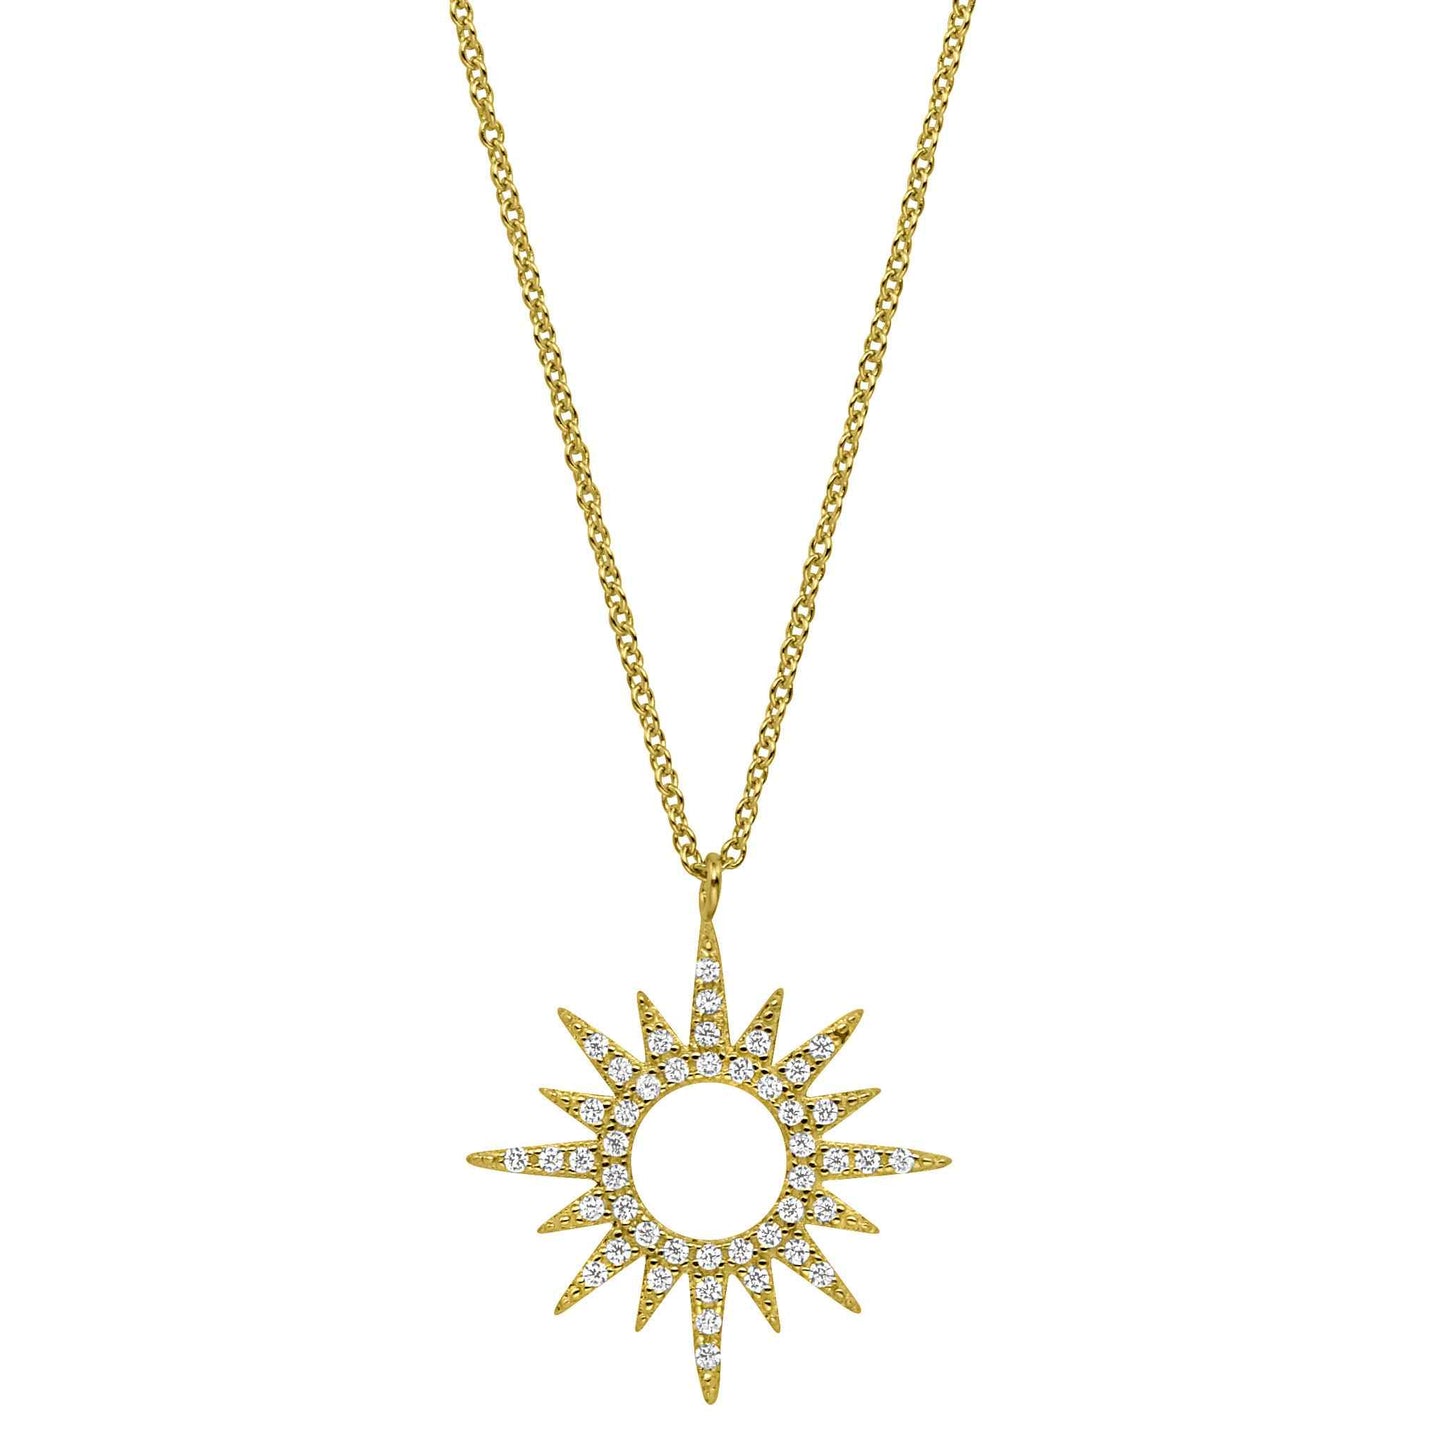 A sterling silver open starburst necklace with simulated diamonds displayed on a neutral white background.